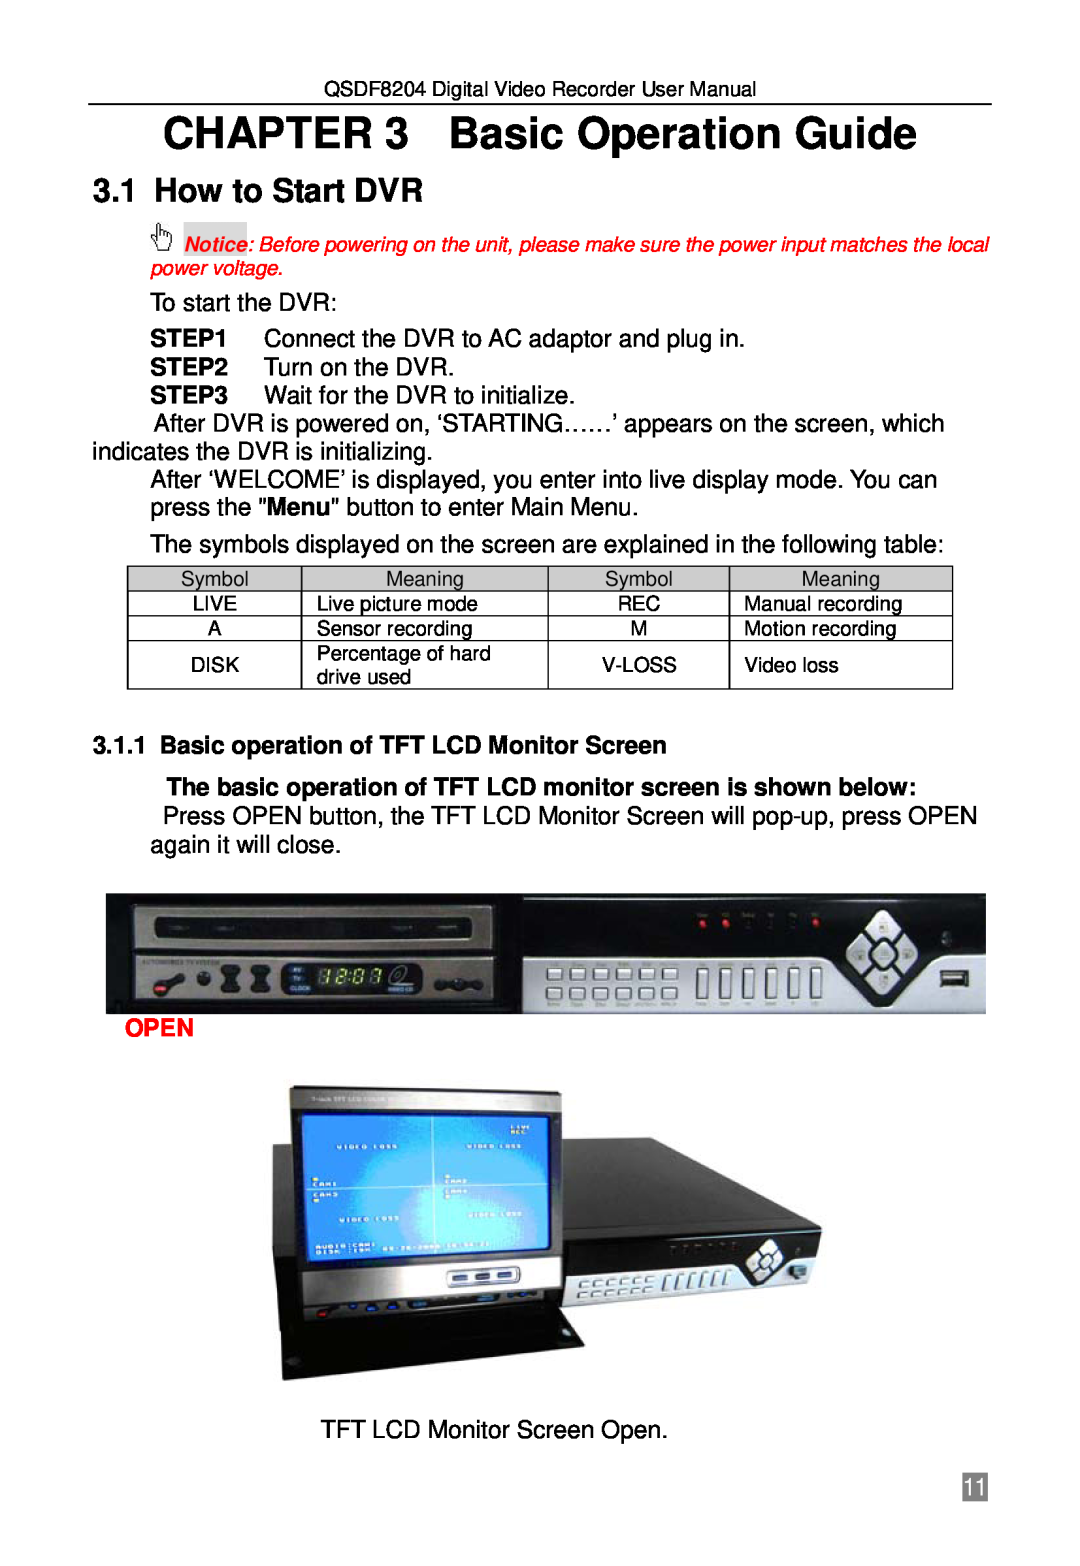 Q-See QSDF8204 user manual Basic Operation Guide, How to Start DVR, Basic operation of TFT LCD Monitor Screen, Open 